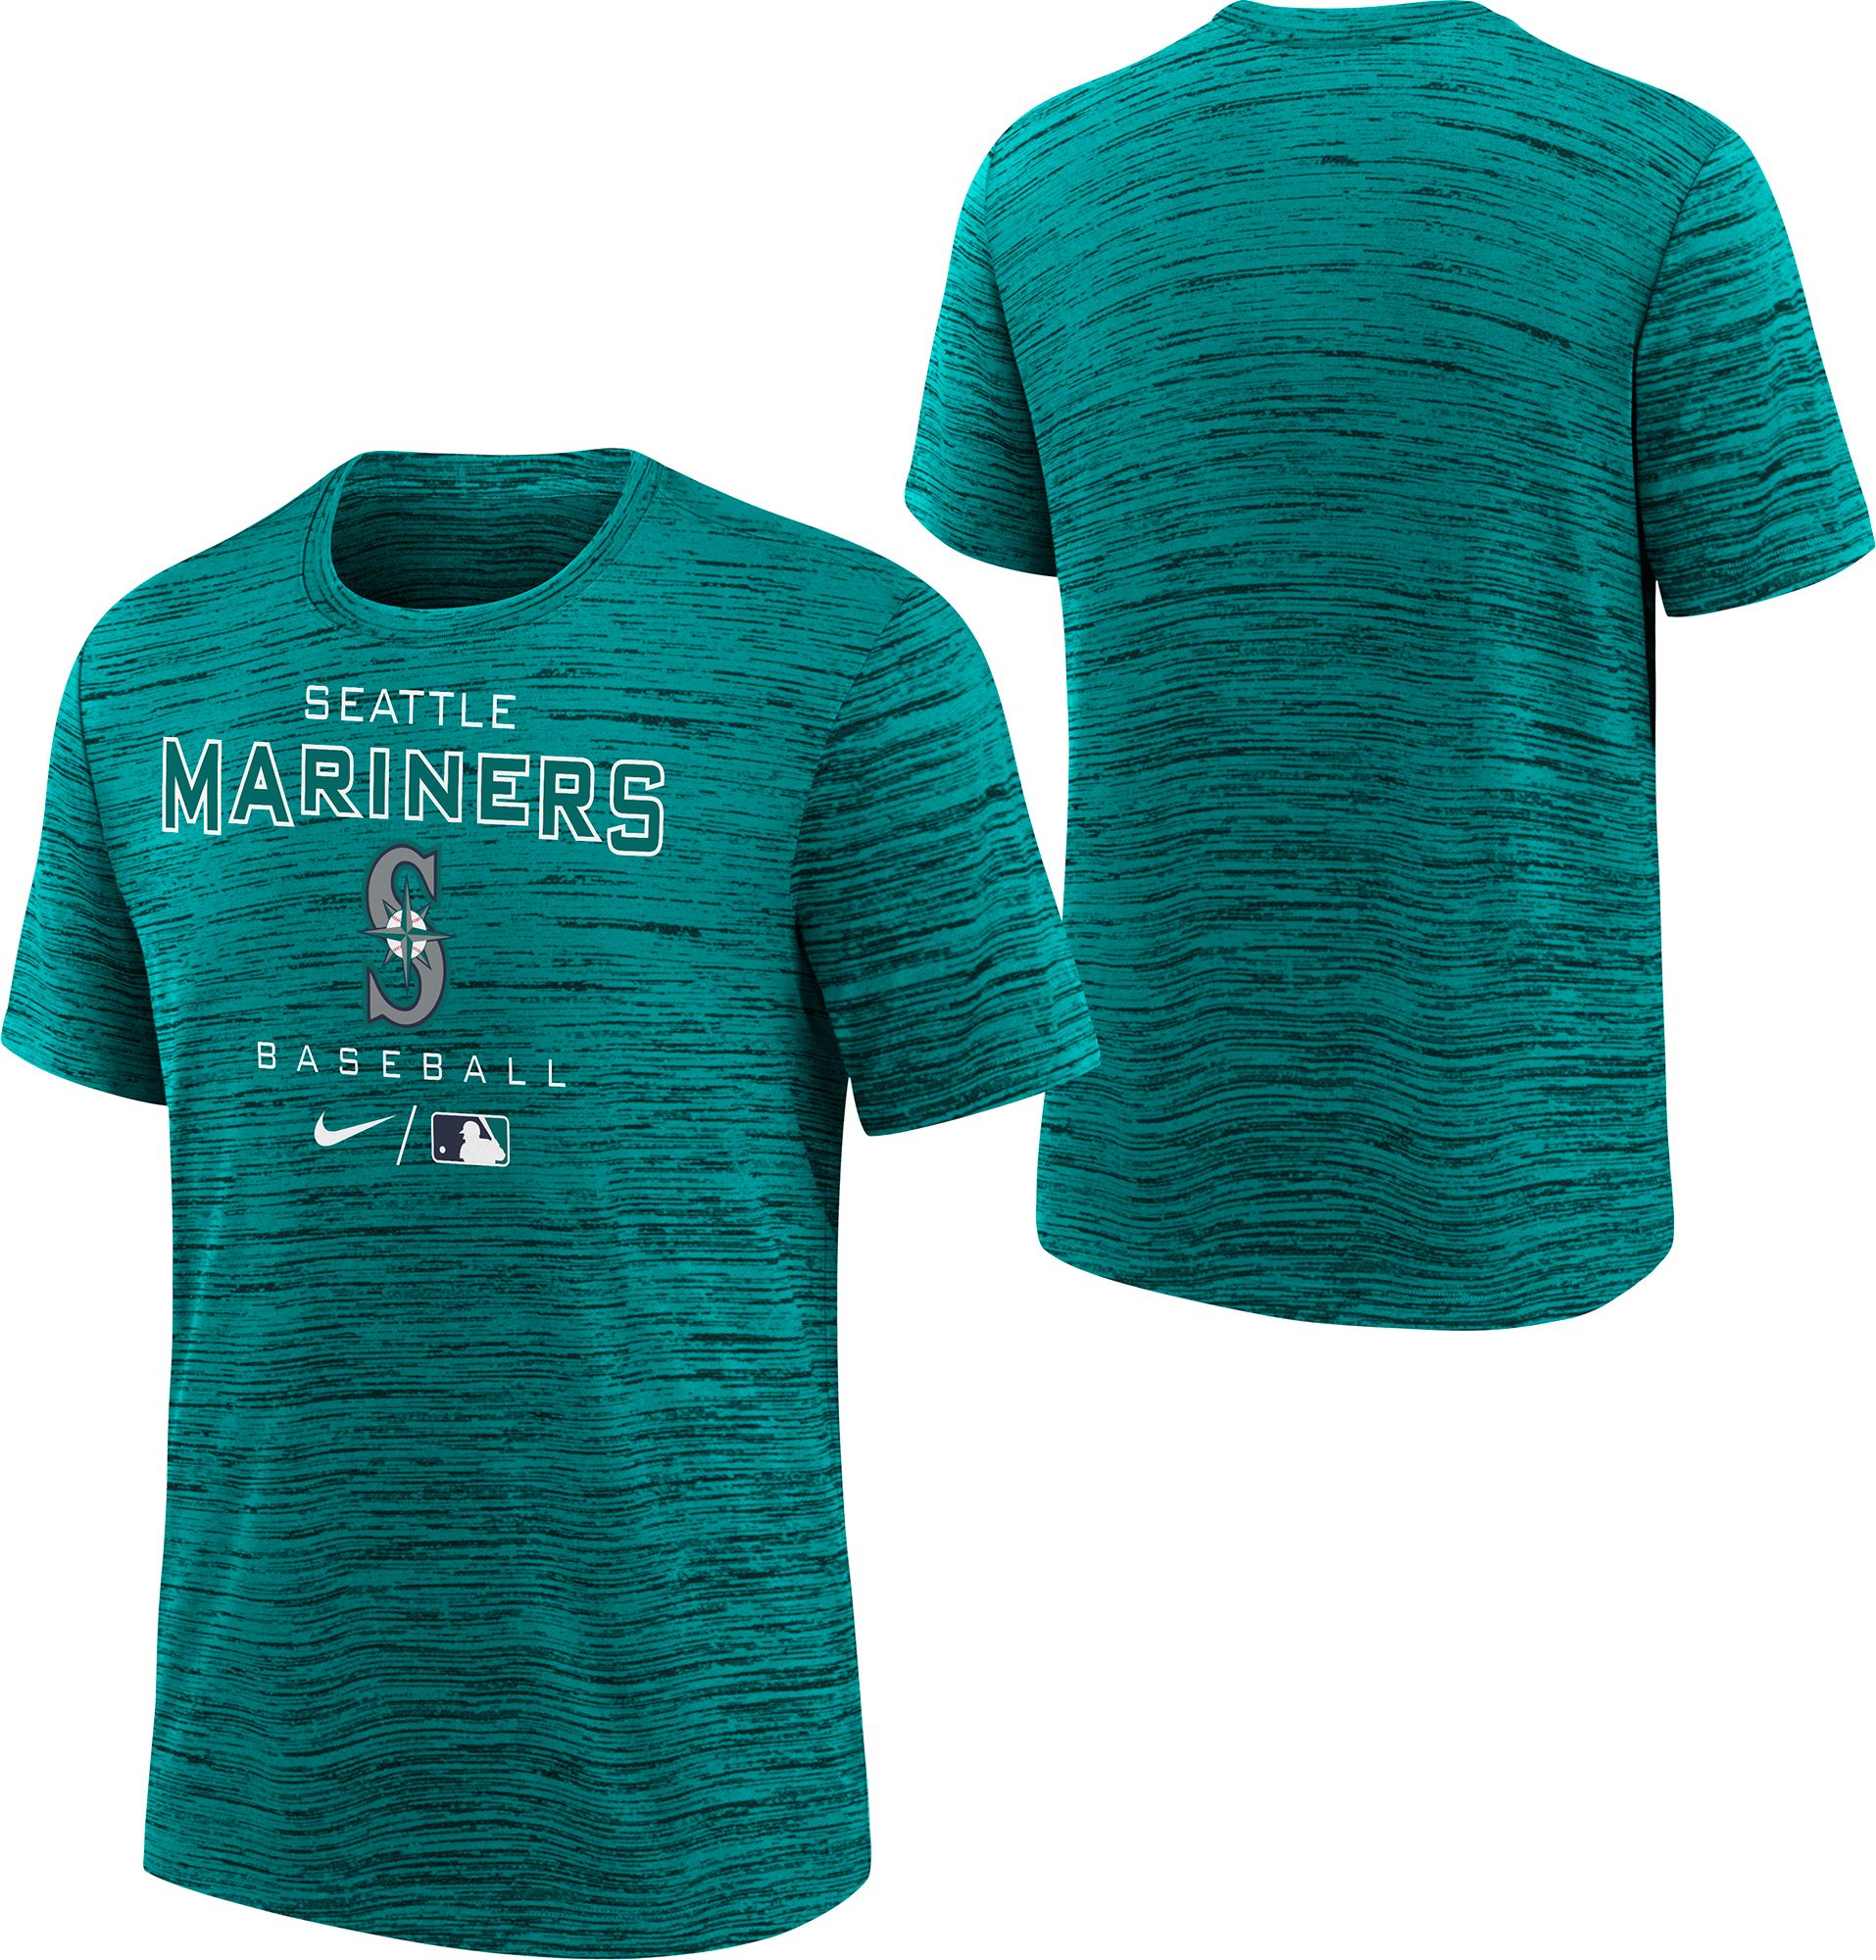 Nike / Youth Boys' Seattle Mariners Green Authentic Collection Velocity T- Shirt